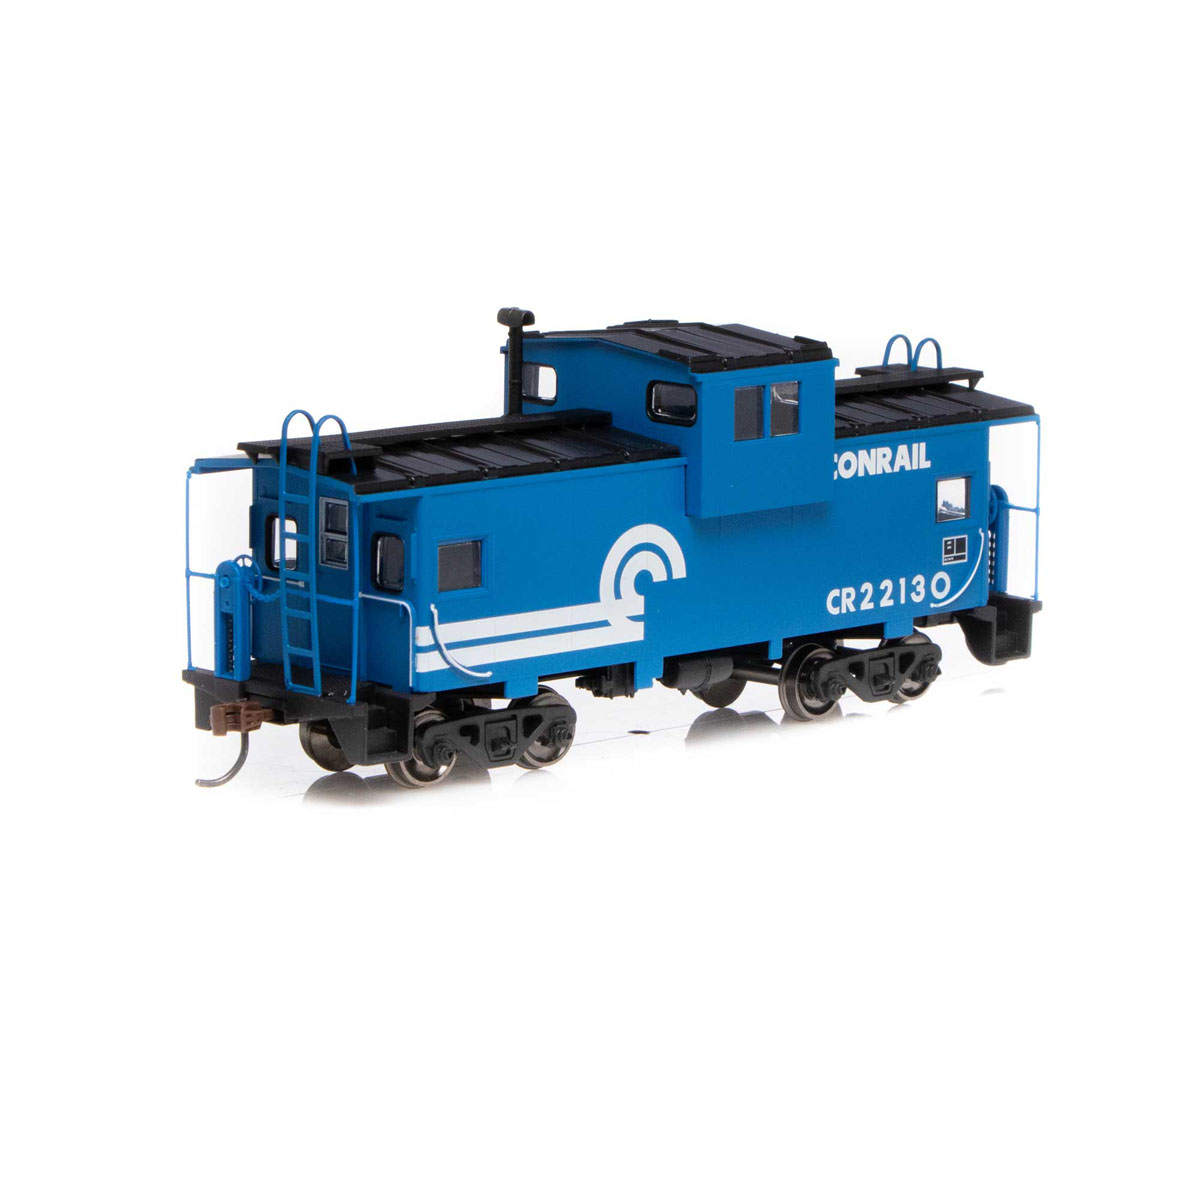 LE4160 ATHEARN 1260 Ho Wagon queue US Wide vision caboose Great Northern X283 